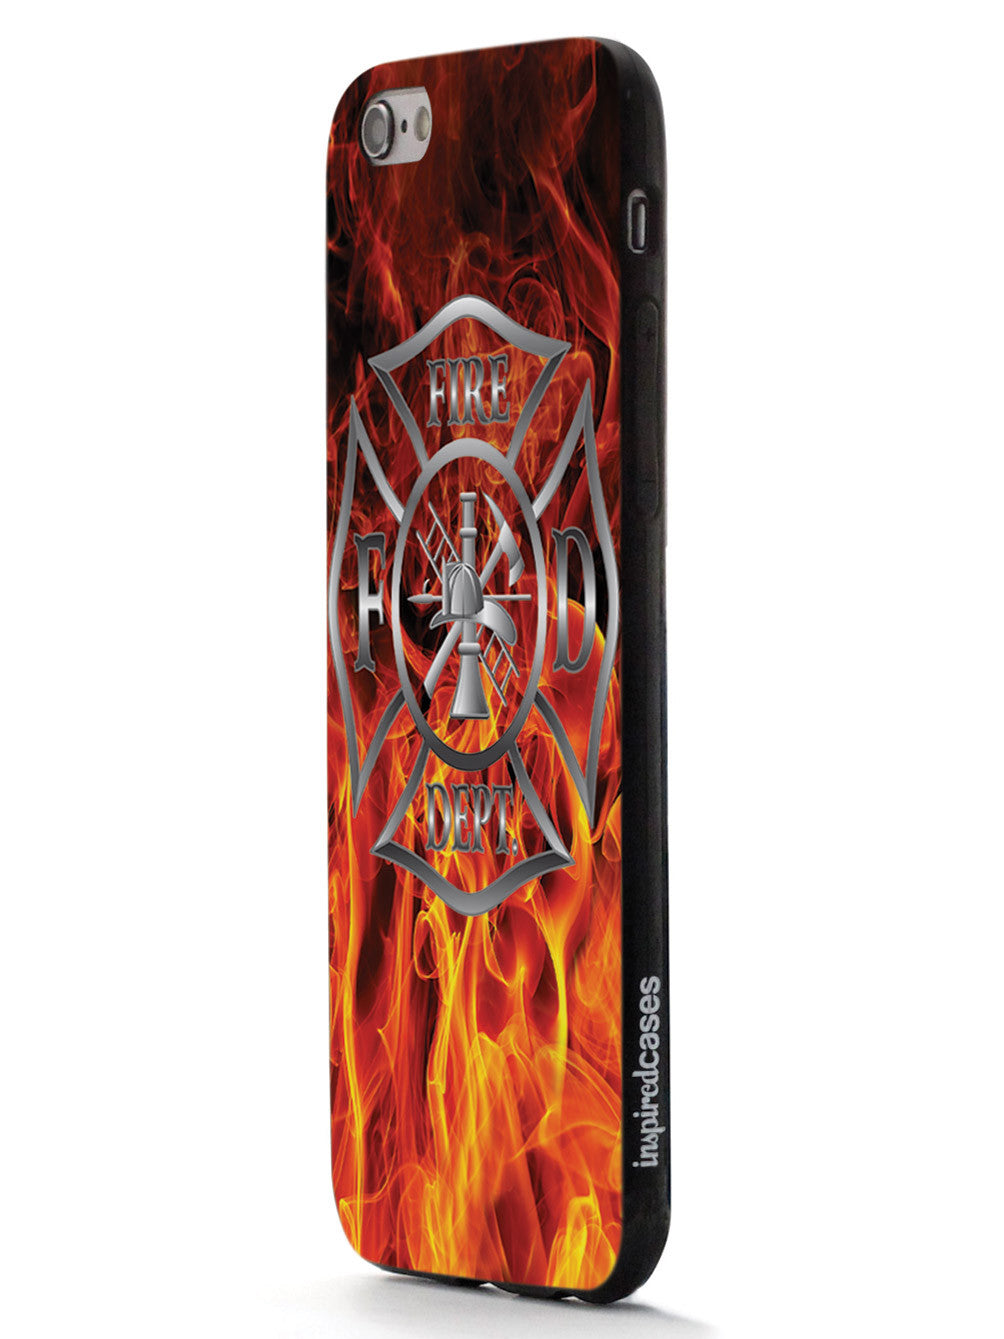 Fire Badge Flame Case For Firemen Fire Department Case